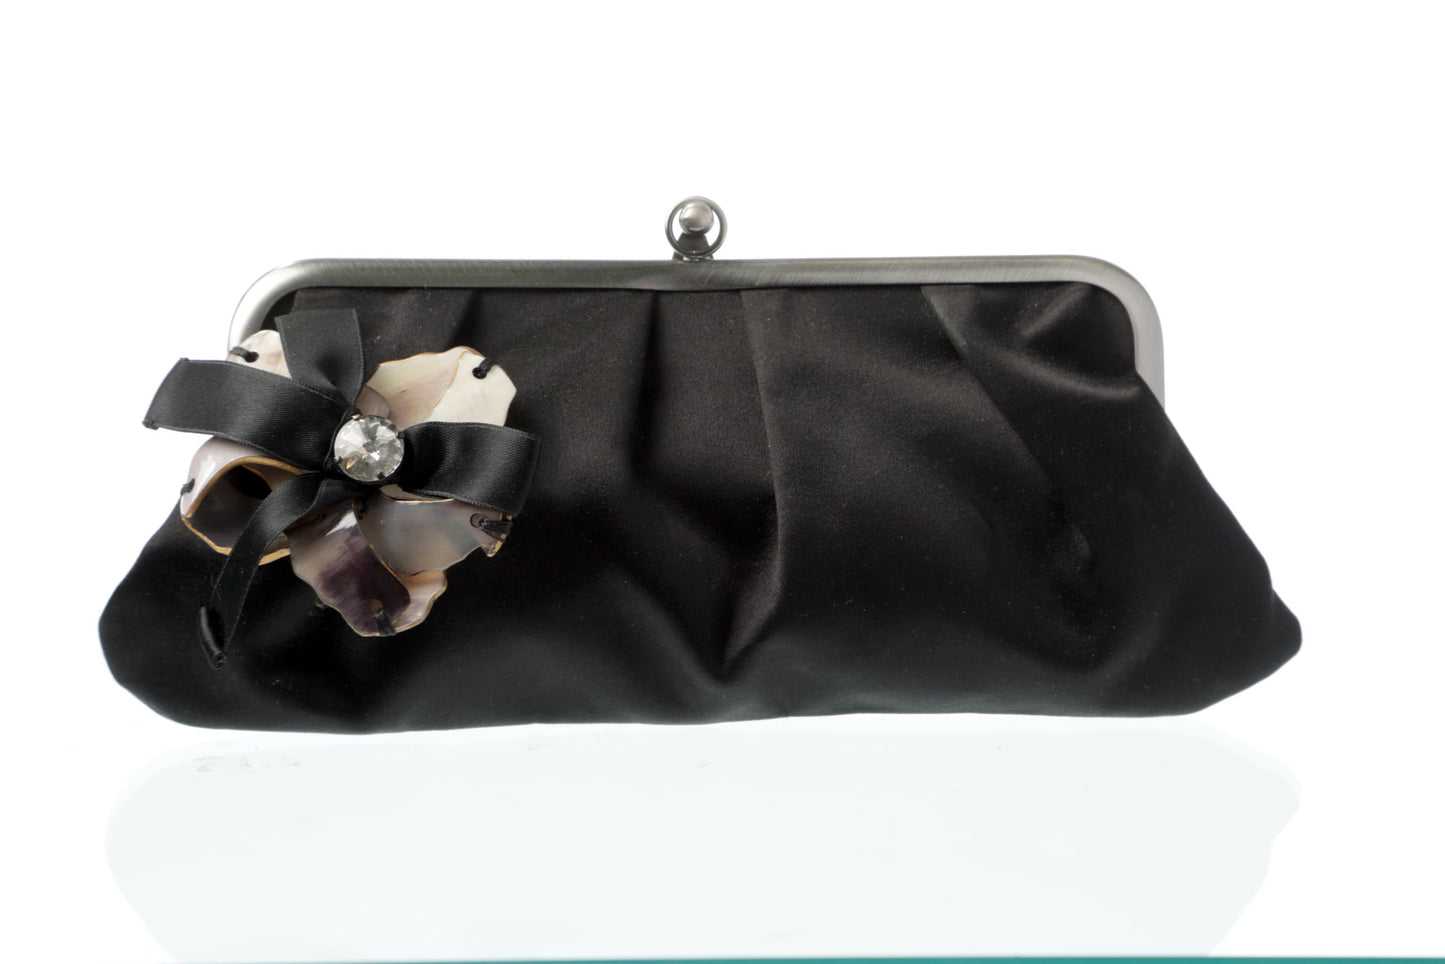 Evening clutch in black satin with floral application by Marni